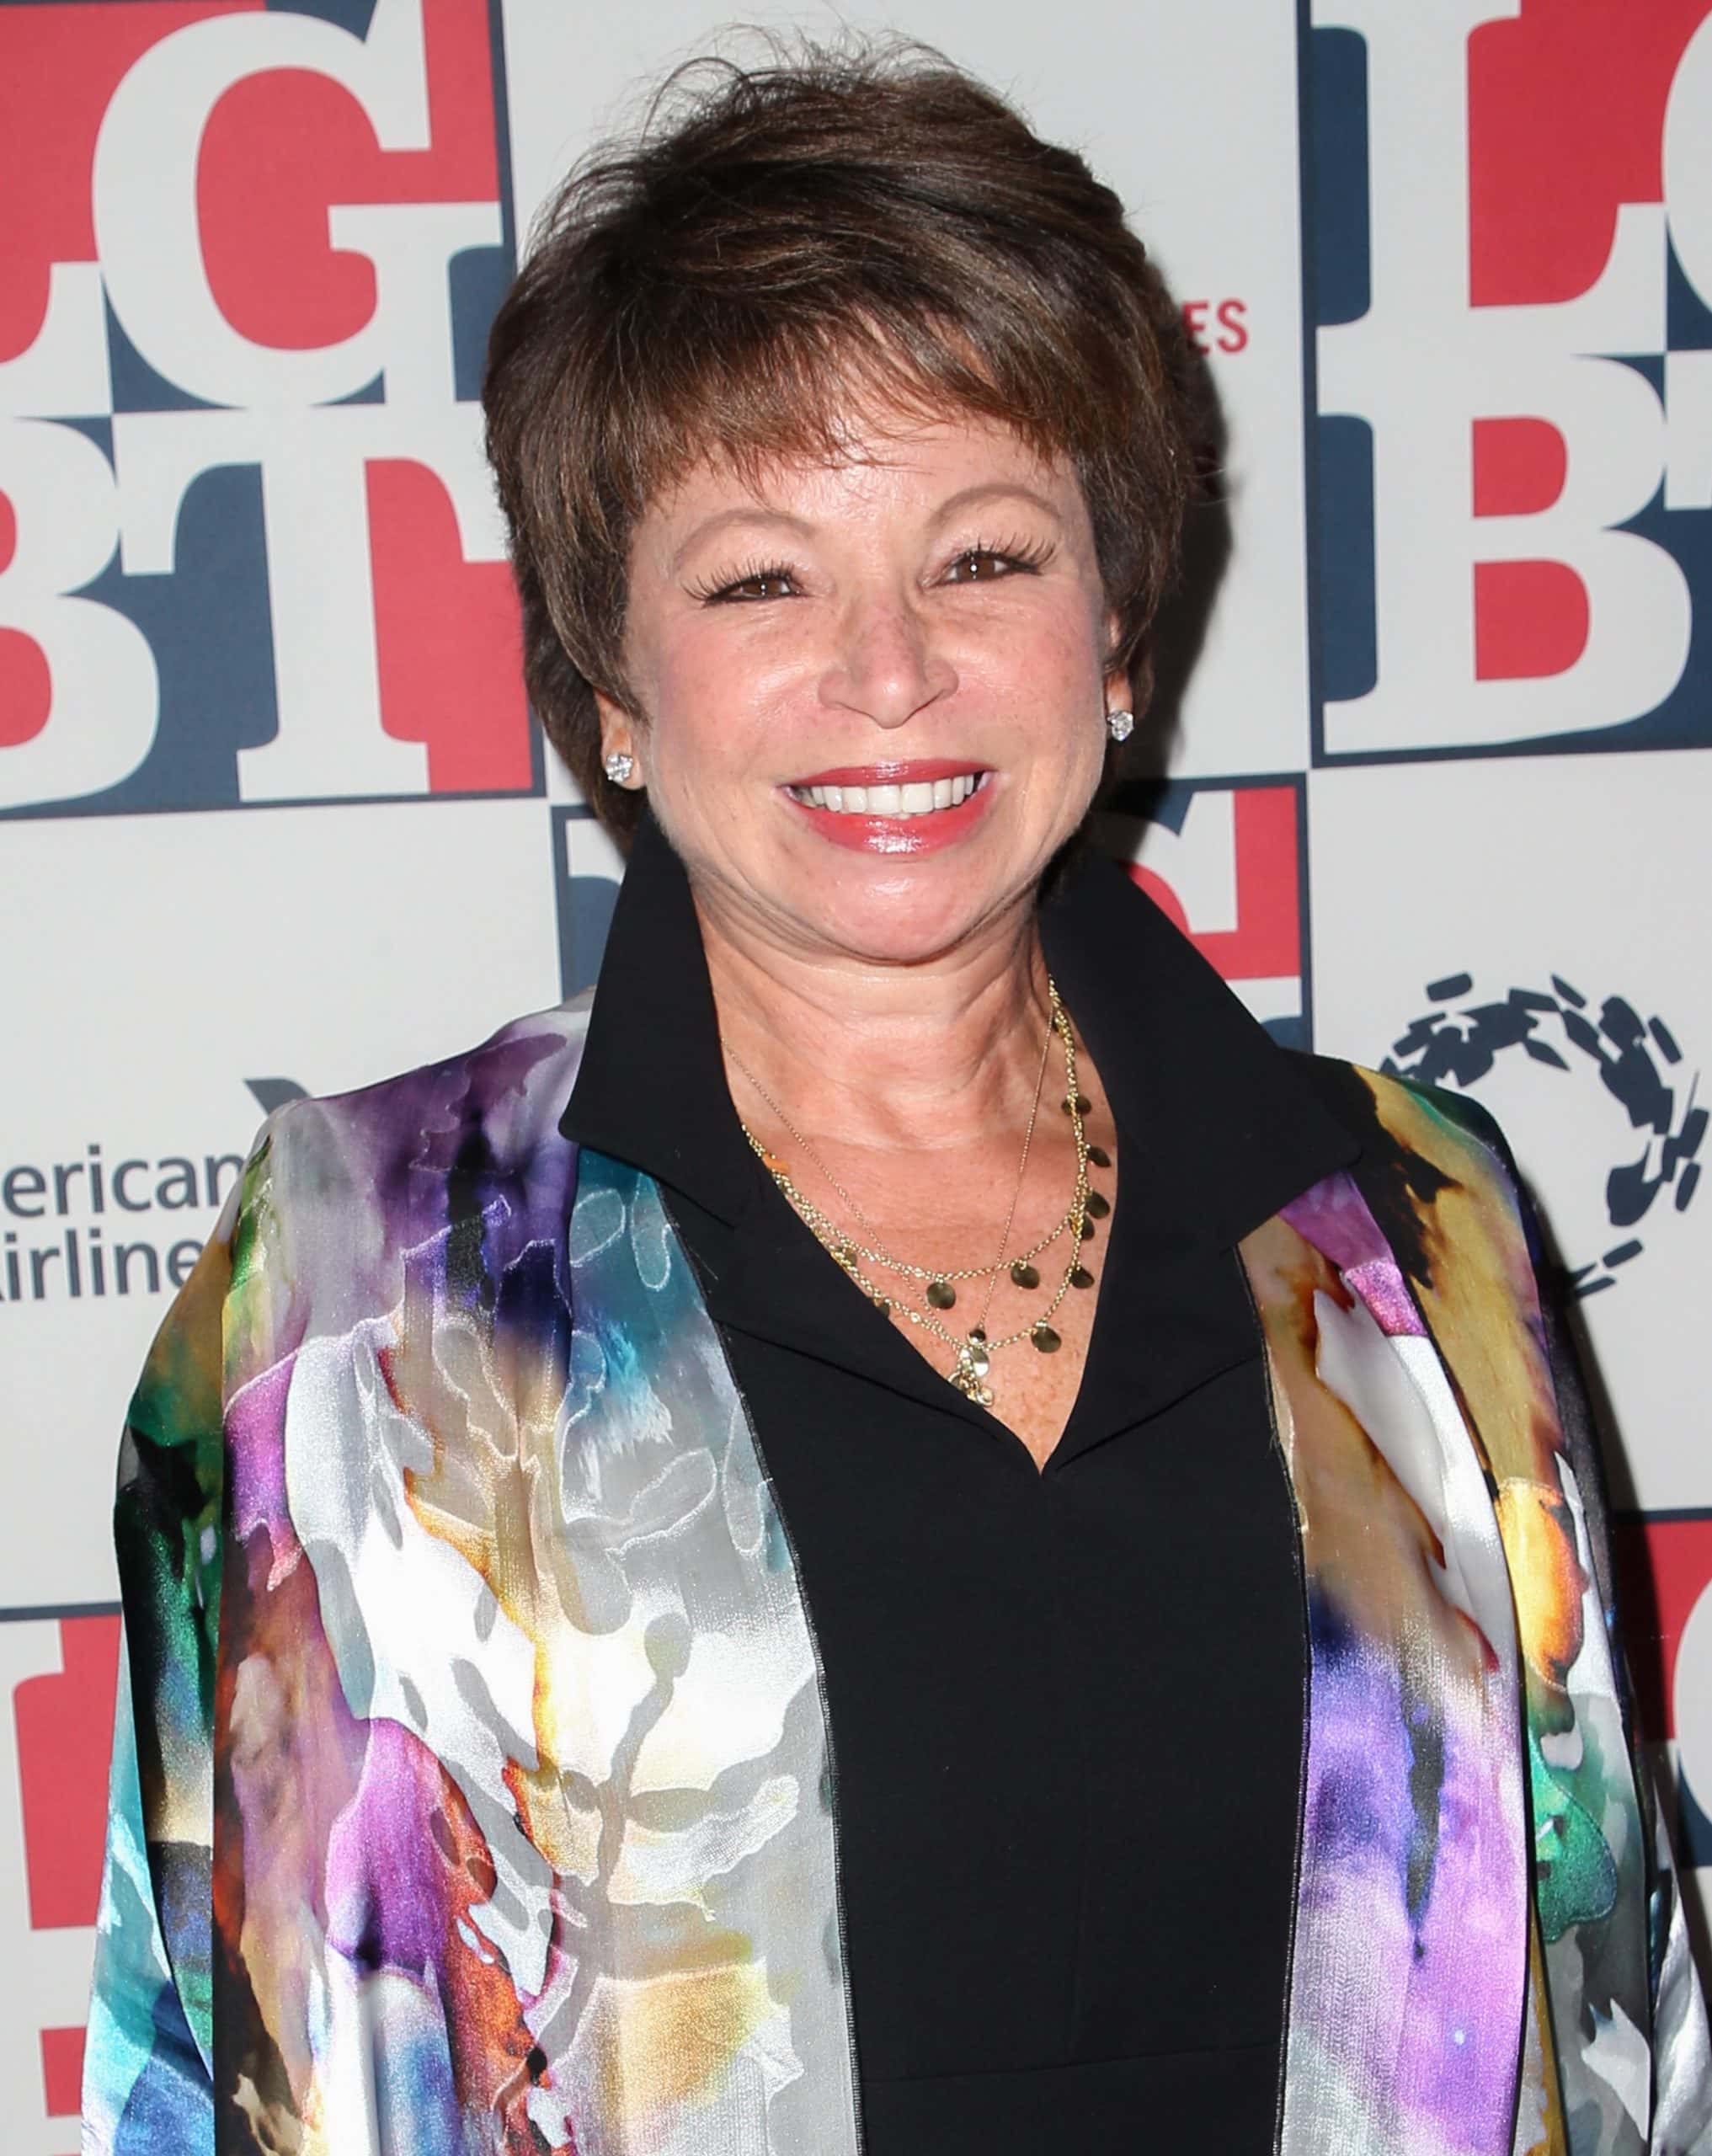 Roseanne Barr's sitcom was canceled after she wrote a racially insensitive tweet aimed at former Obama adviser Valerie Jarrett